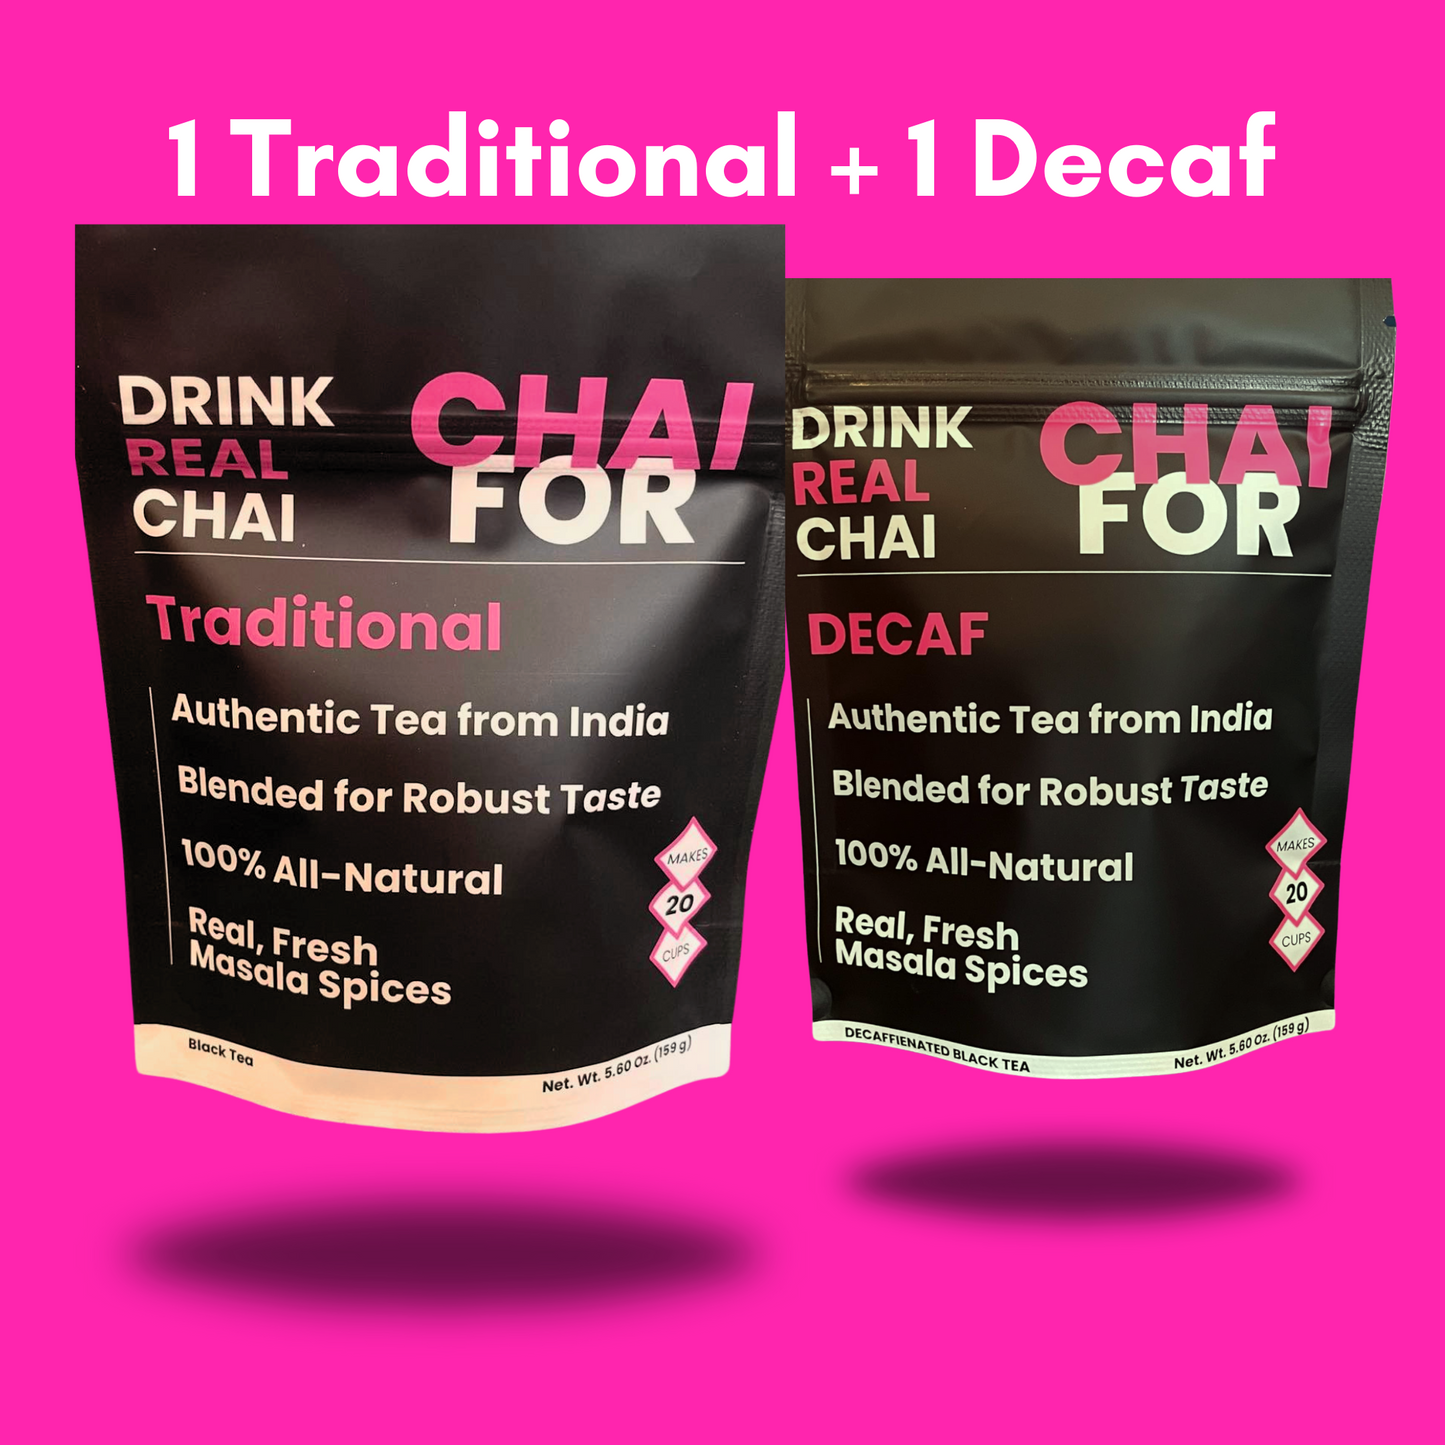 One traditional chai kit and one decaffeinated chai kit bundled together for saving money.